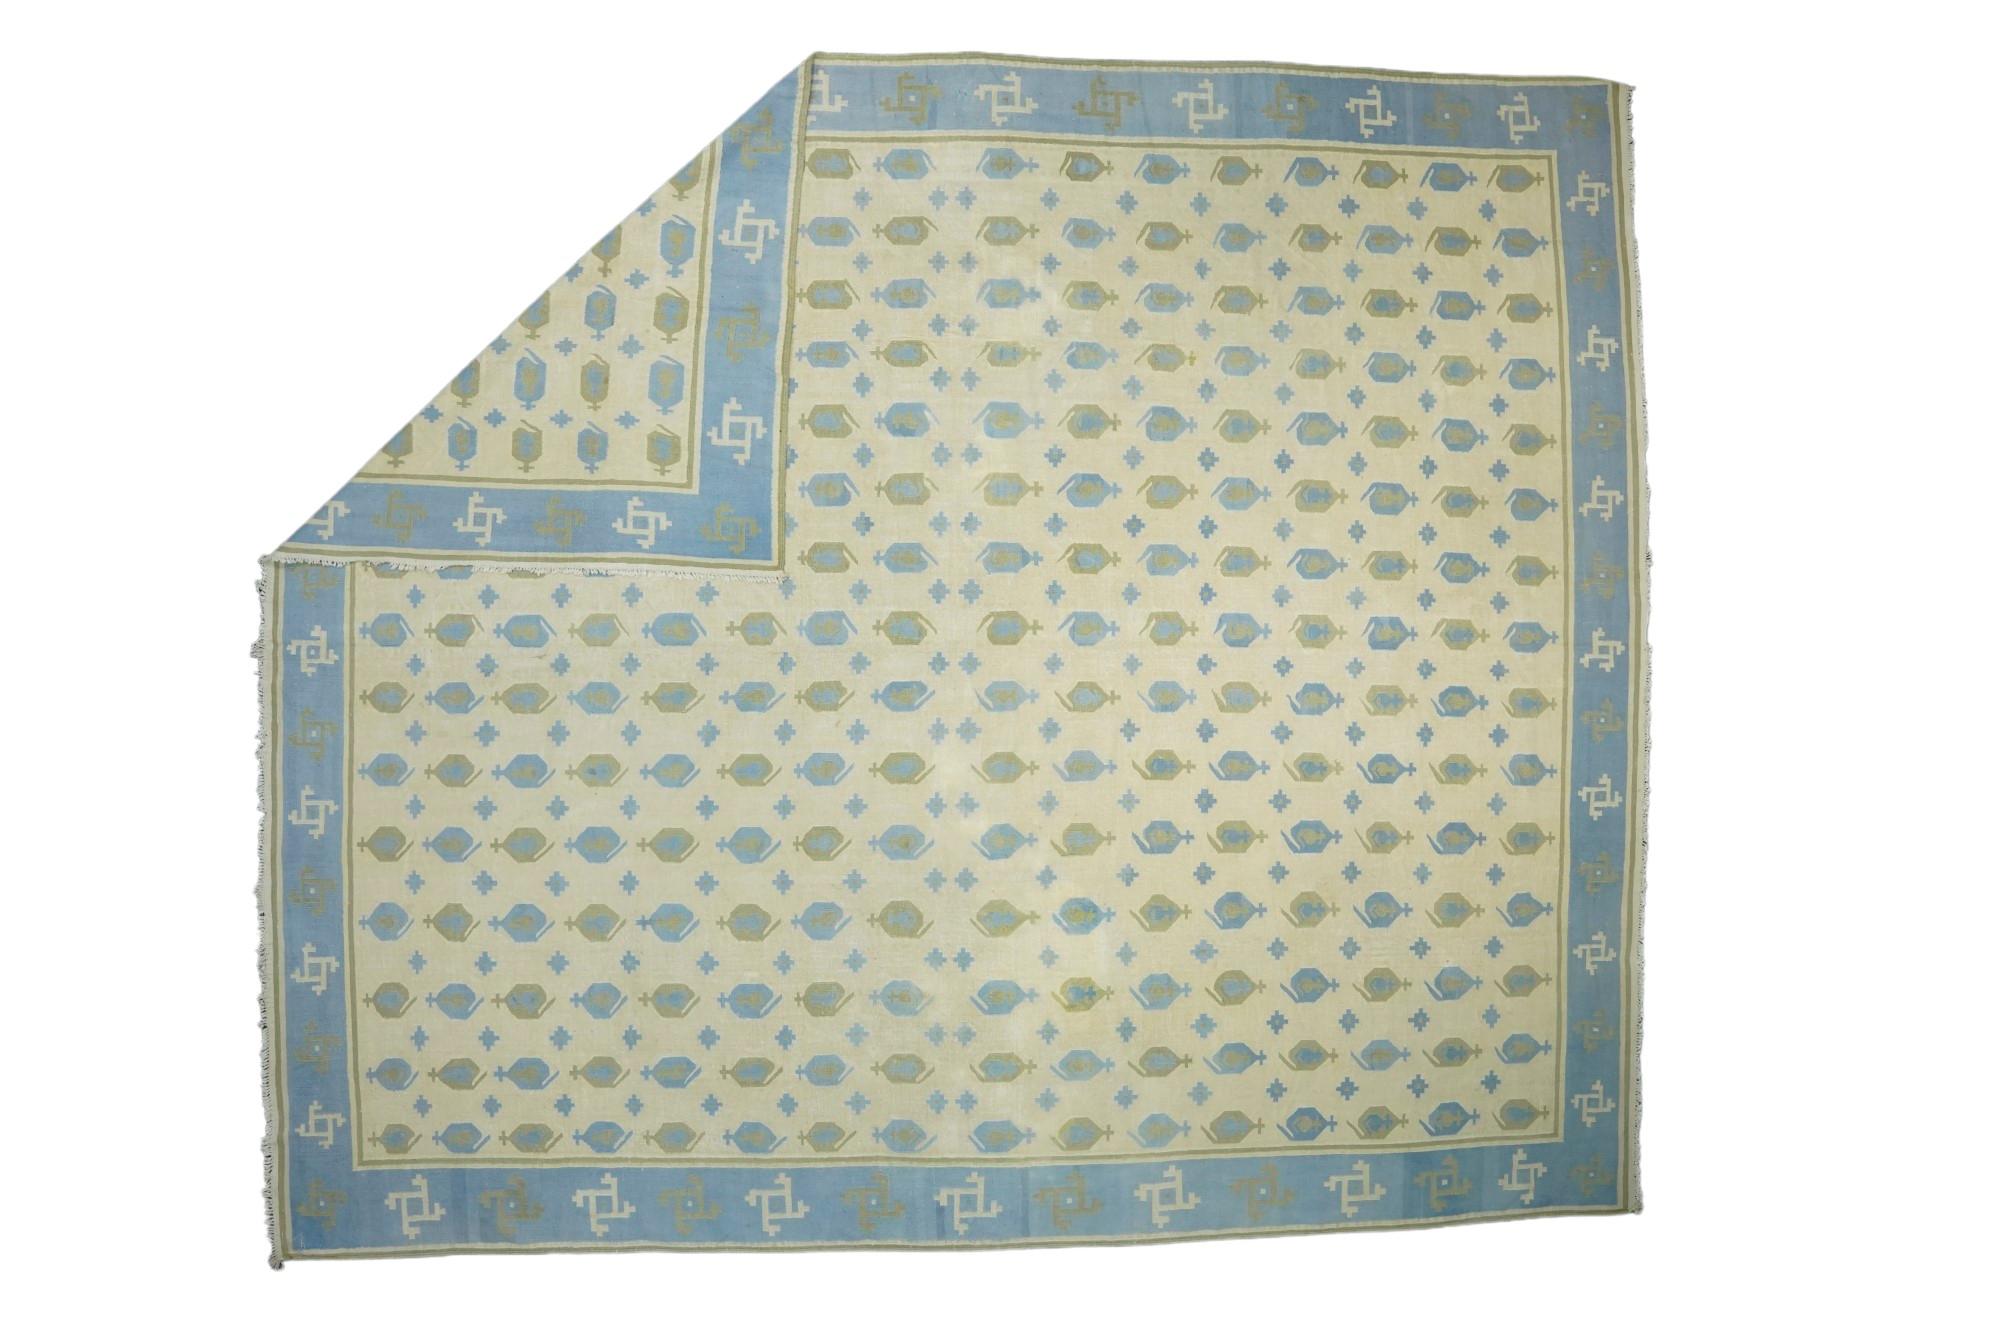 This 13x15 rug is a rare vintage Dhurrie rug from an exciting new mid-century curation by Rug & Kilim. Handwoven in a wool flatweave, it originates from India circa 1950-1960, and enjoys geometric patterns in sky blue and chartreuse green. 

On the